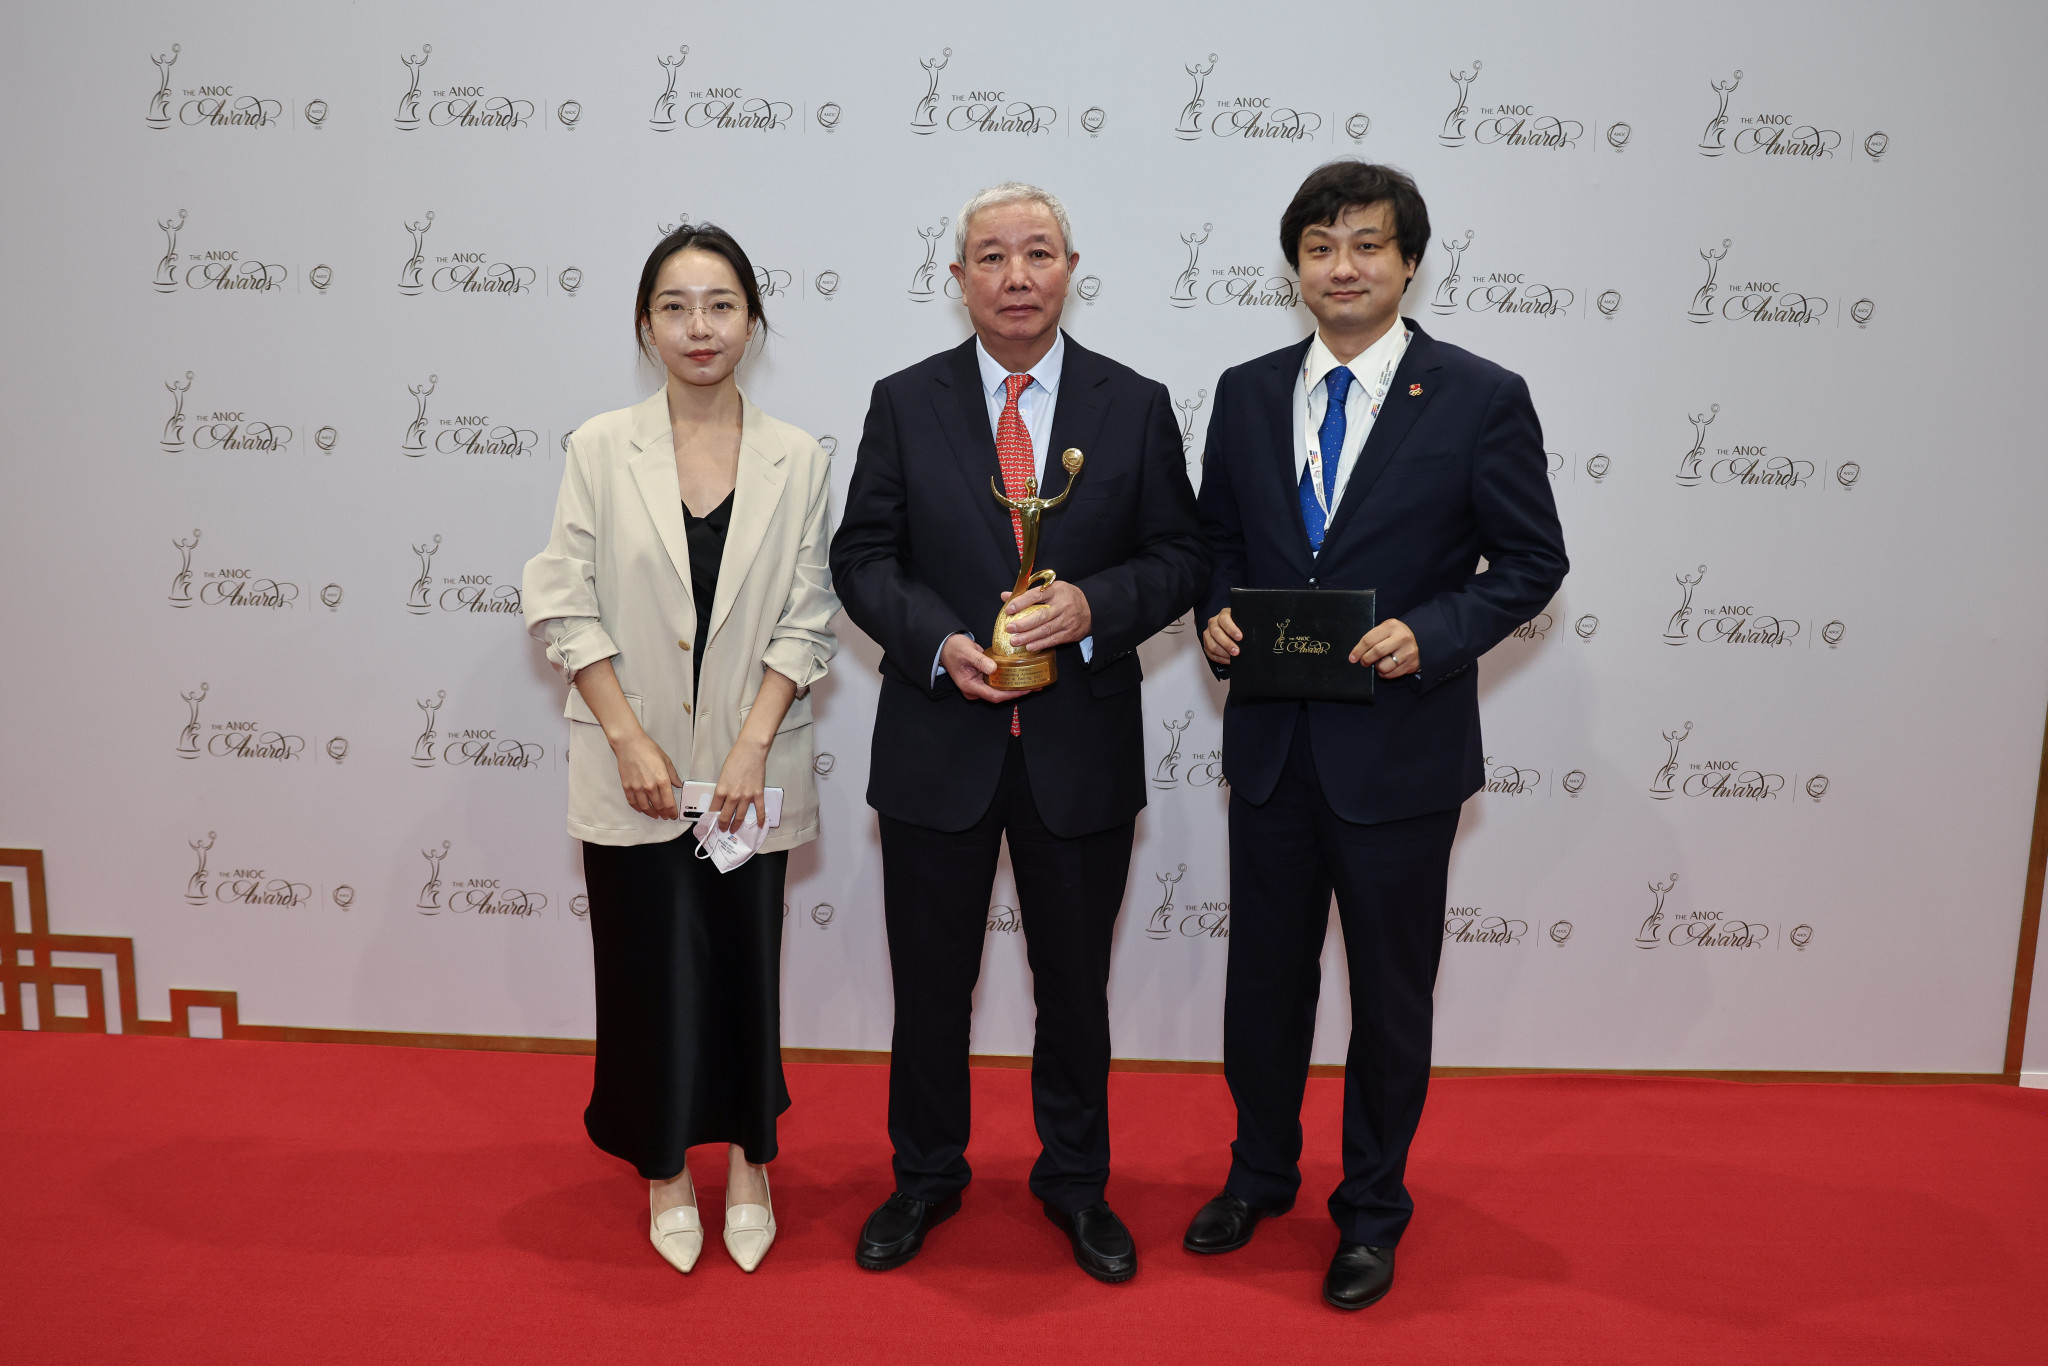 The Chinese Olympic Committee earned the outstanding NOC of Beijing 2022 award after placing third on the medal table with nine golds ©ANOC